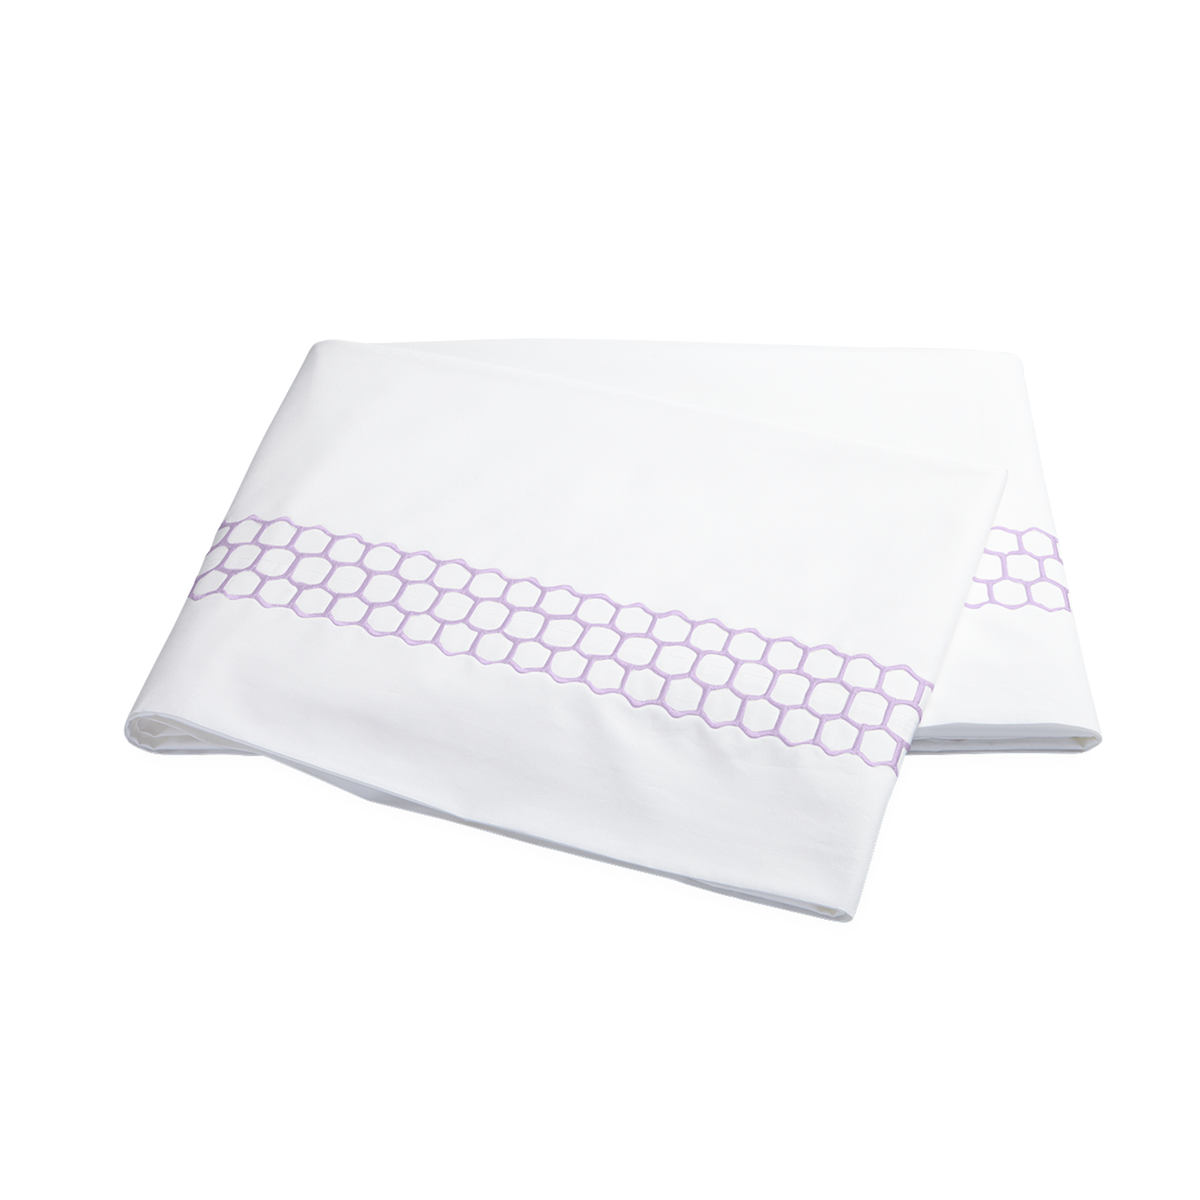 Clear Image of Matouk Liana Bedding Flat Sheet in Lavender Color